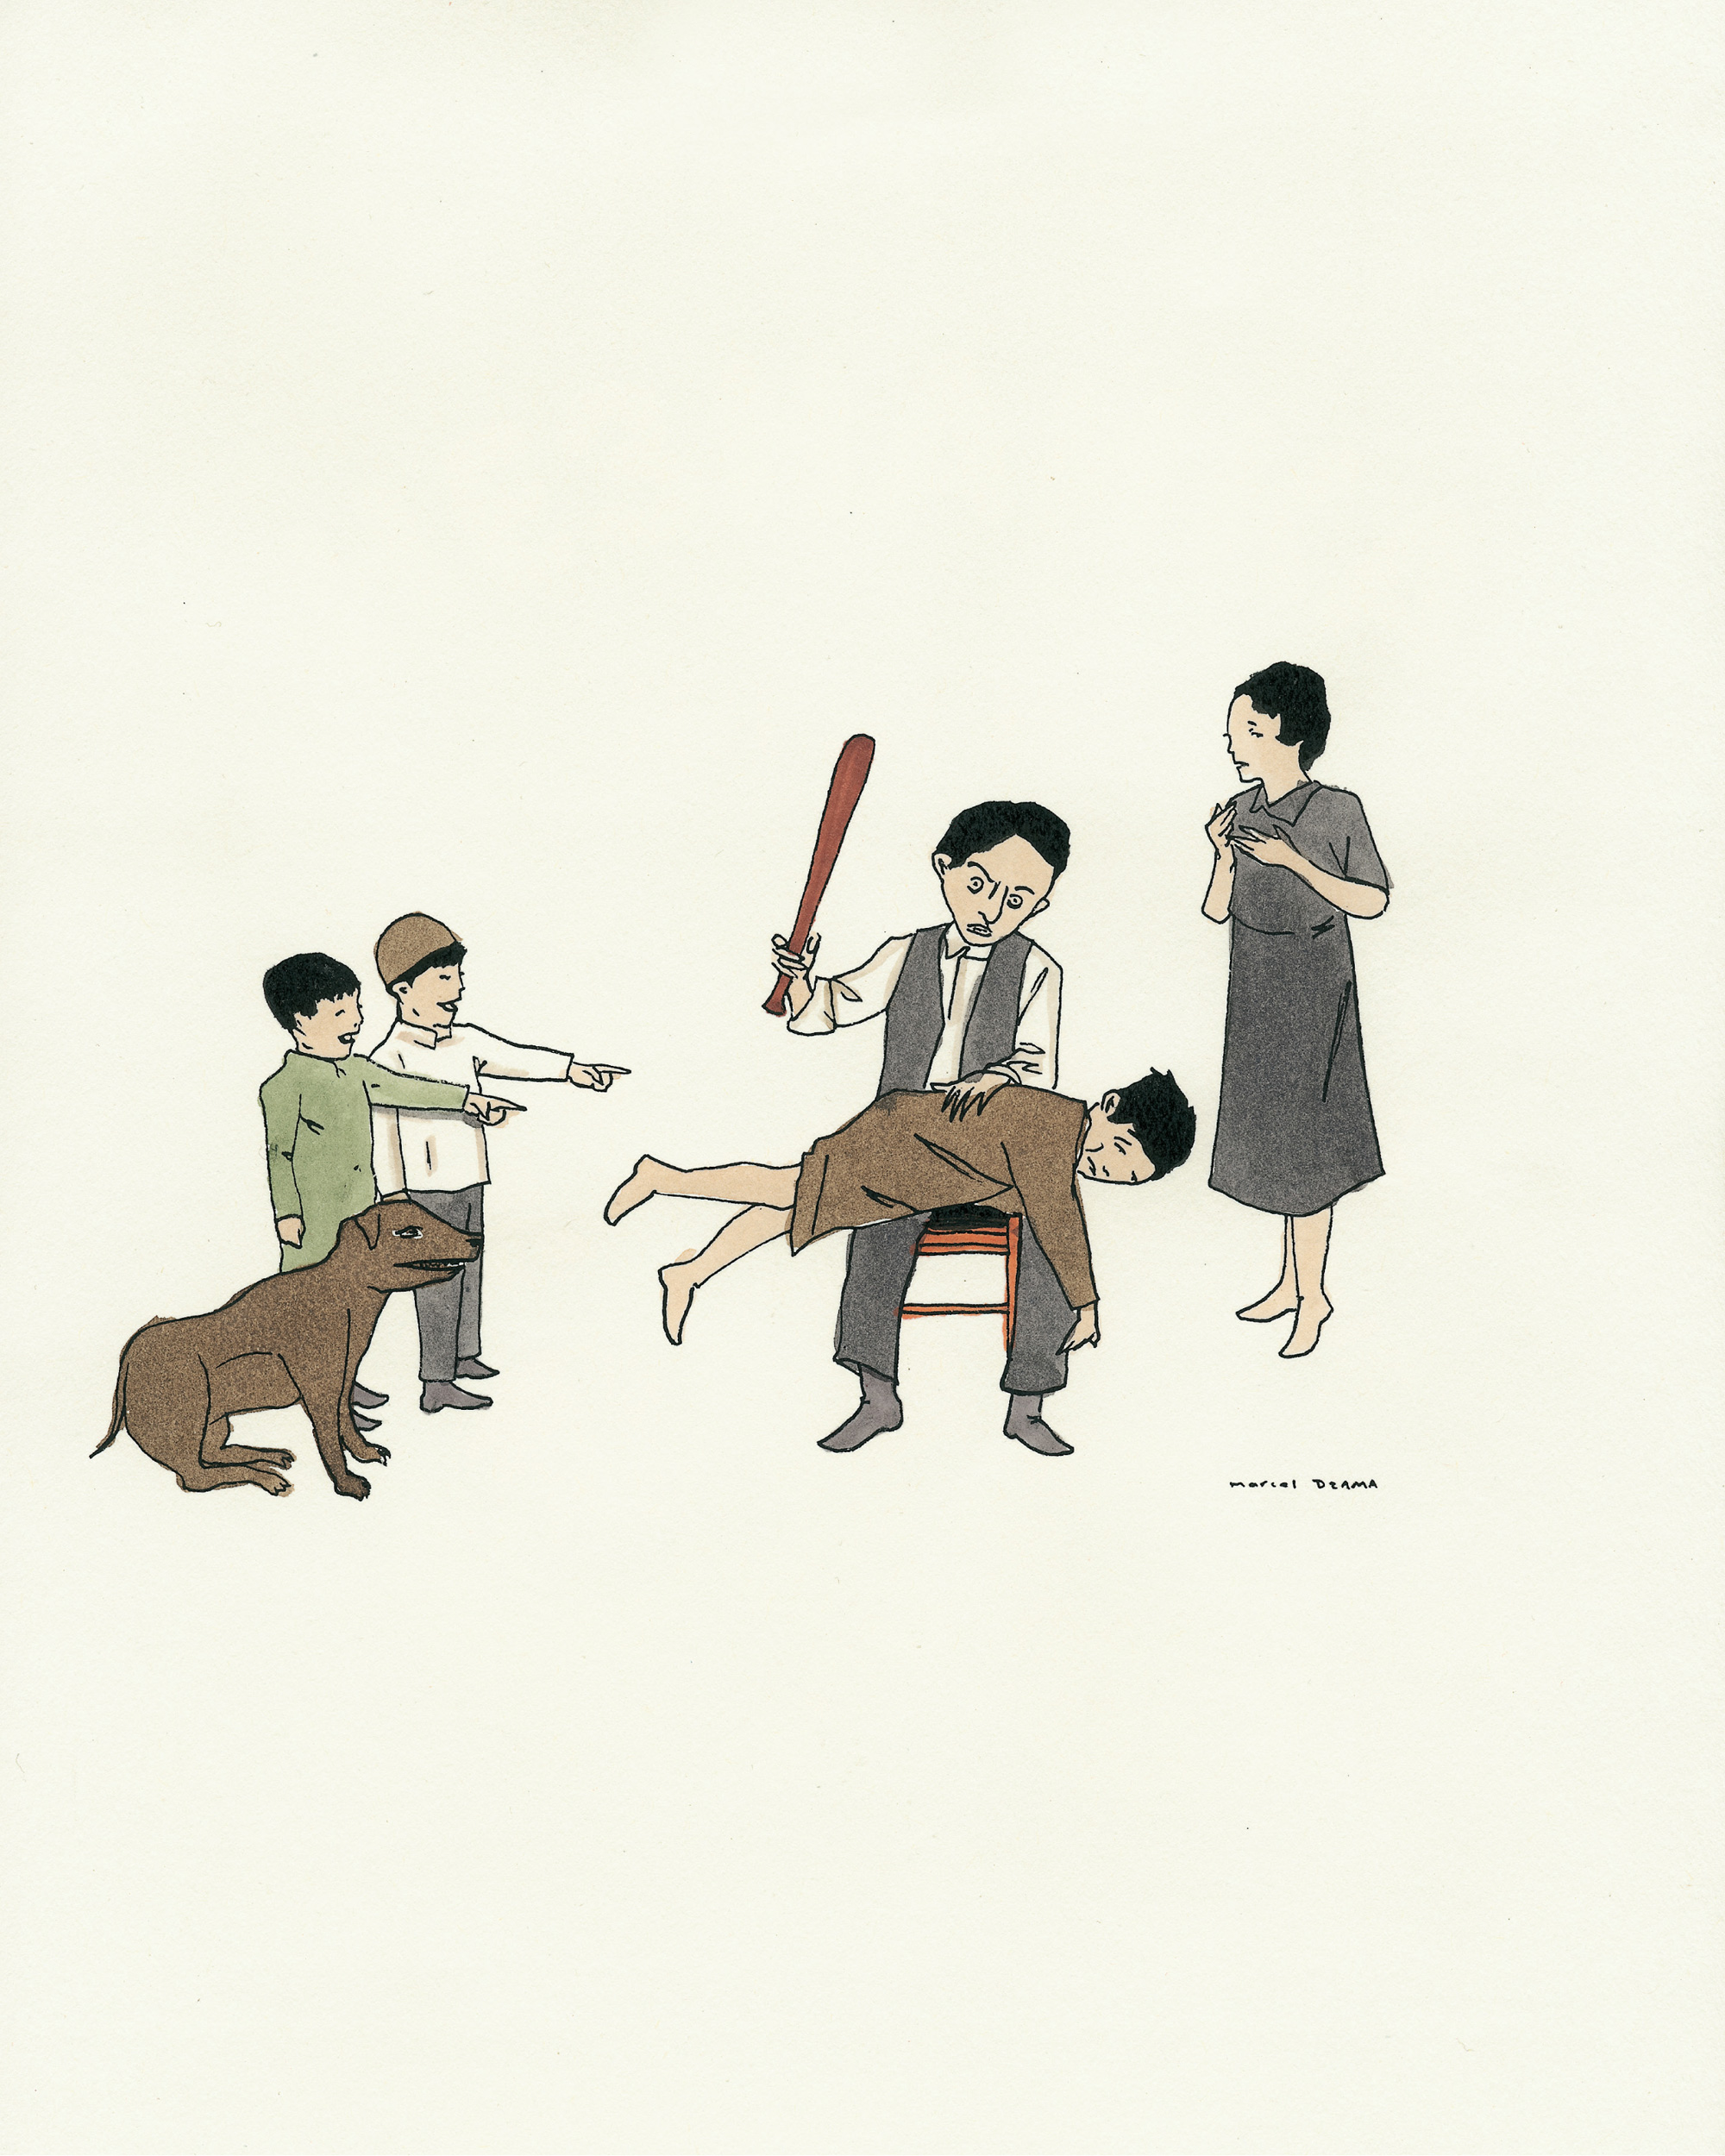 A 2002 drawing of children by Marcel Dzama.